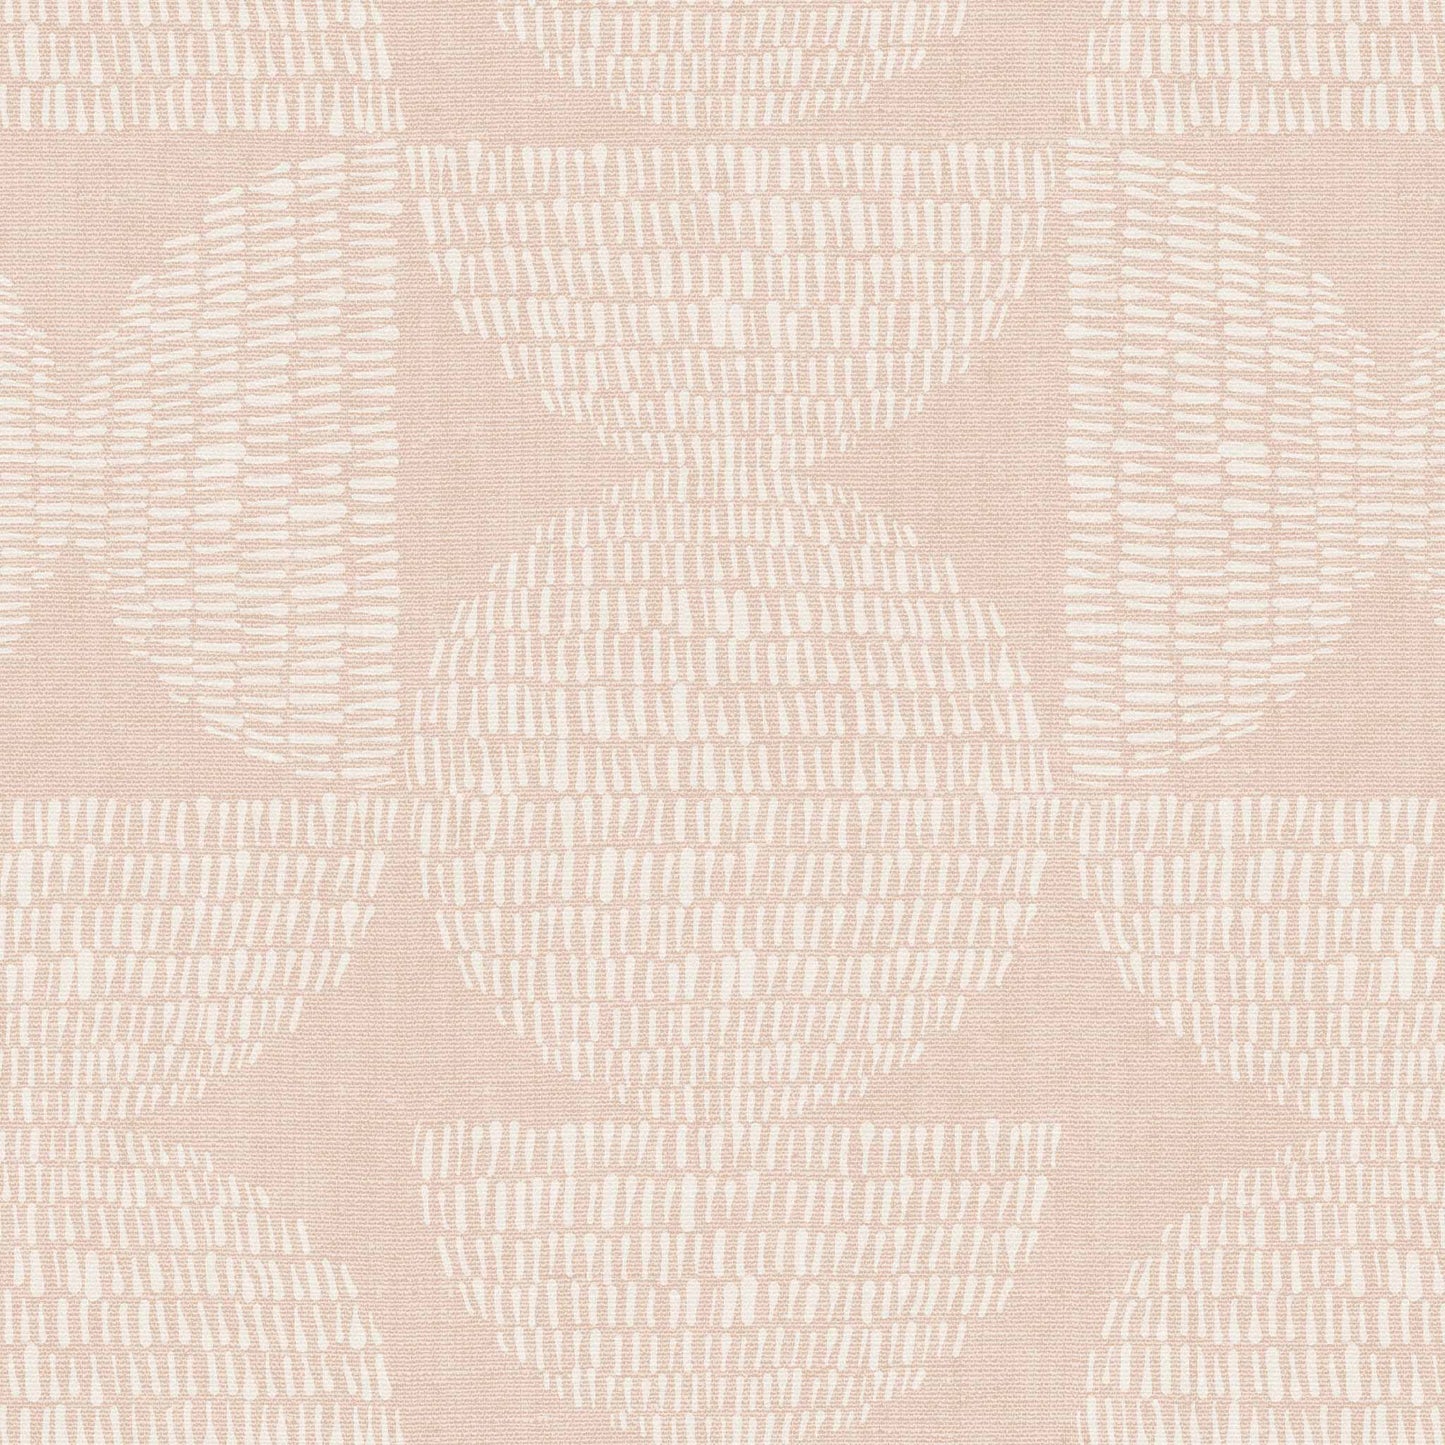 Go crazy with circles! Get yourself these stylish Half Circle Blocks Wallpapers for a unique wall decor solution. With its pale pink design, these geometric wallpapers will easily liven up any room, making it look modern and chic.